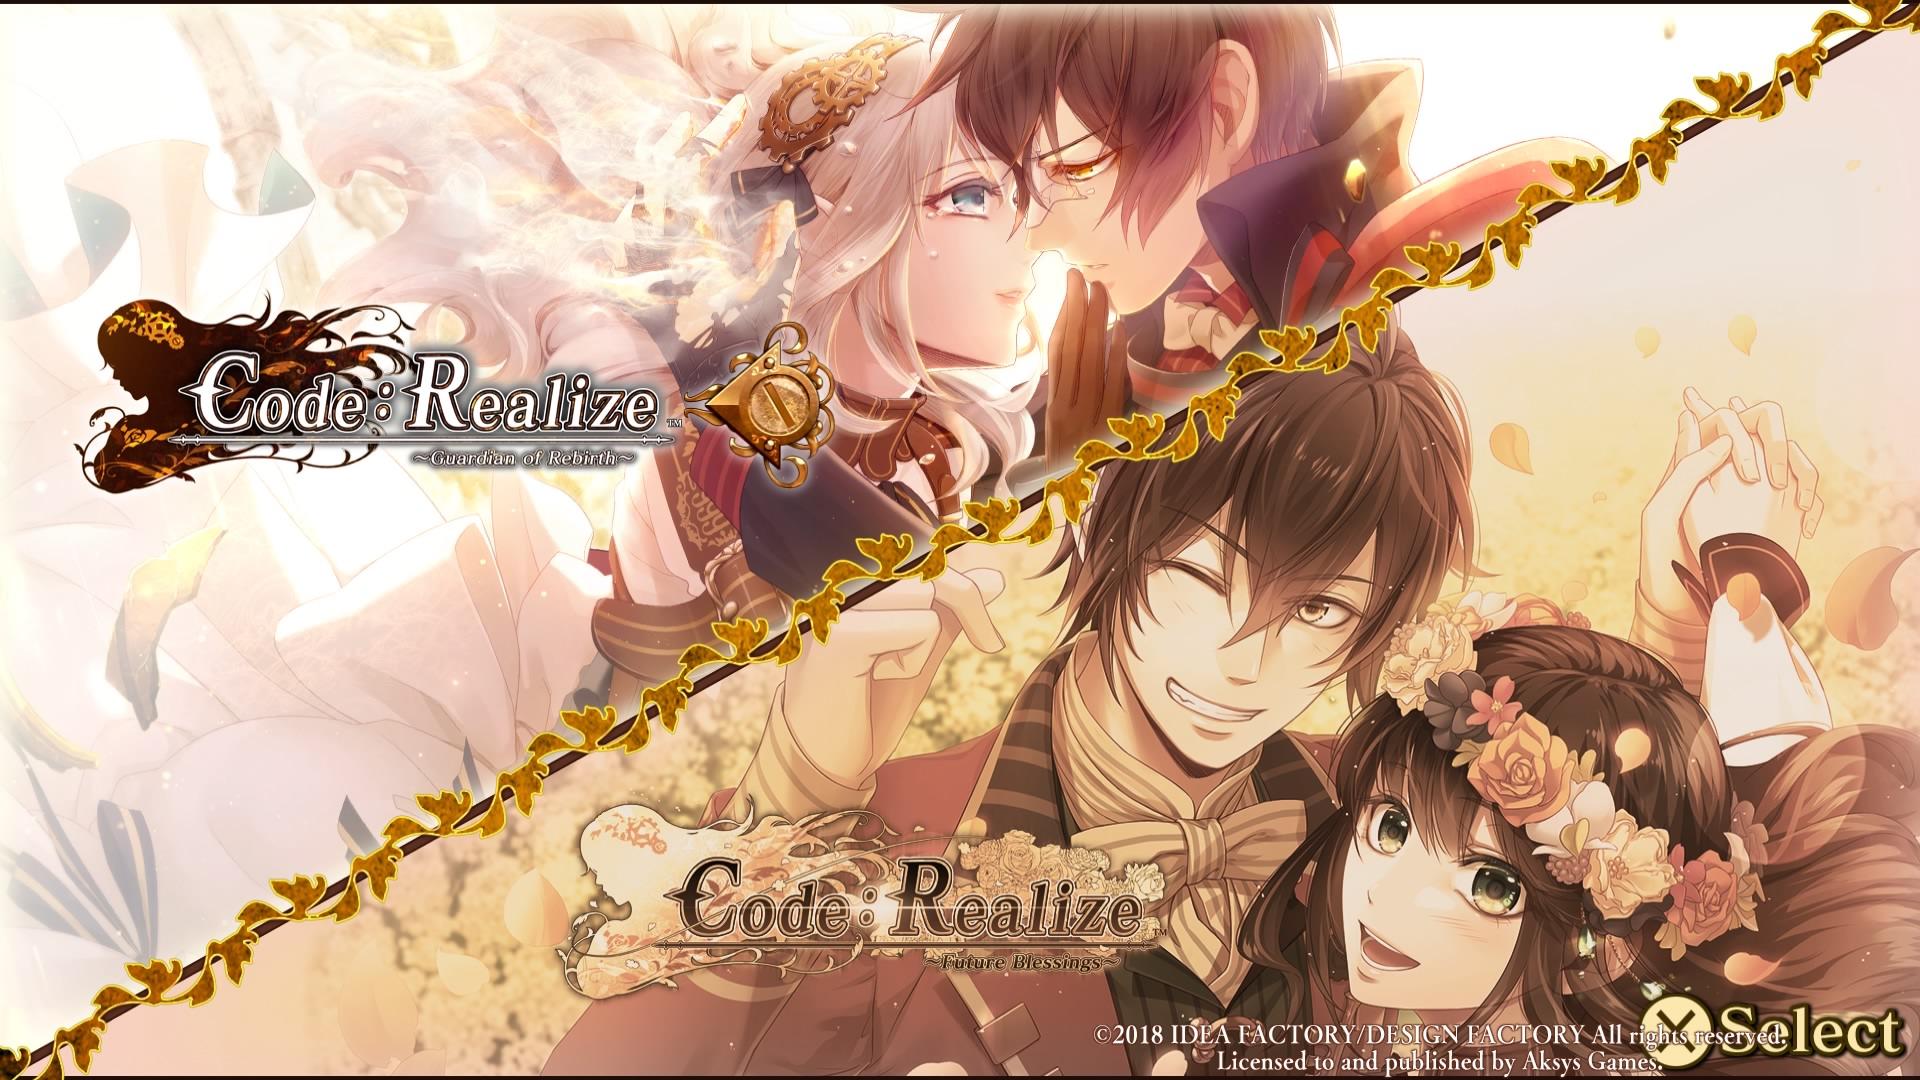 REVIEW: Code: Realize Bouquet of Rainbows